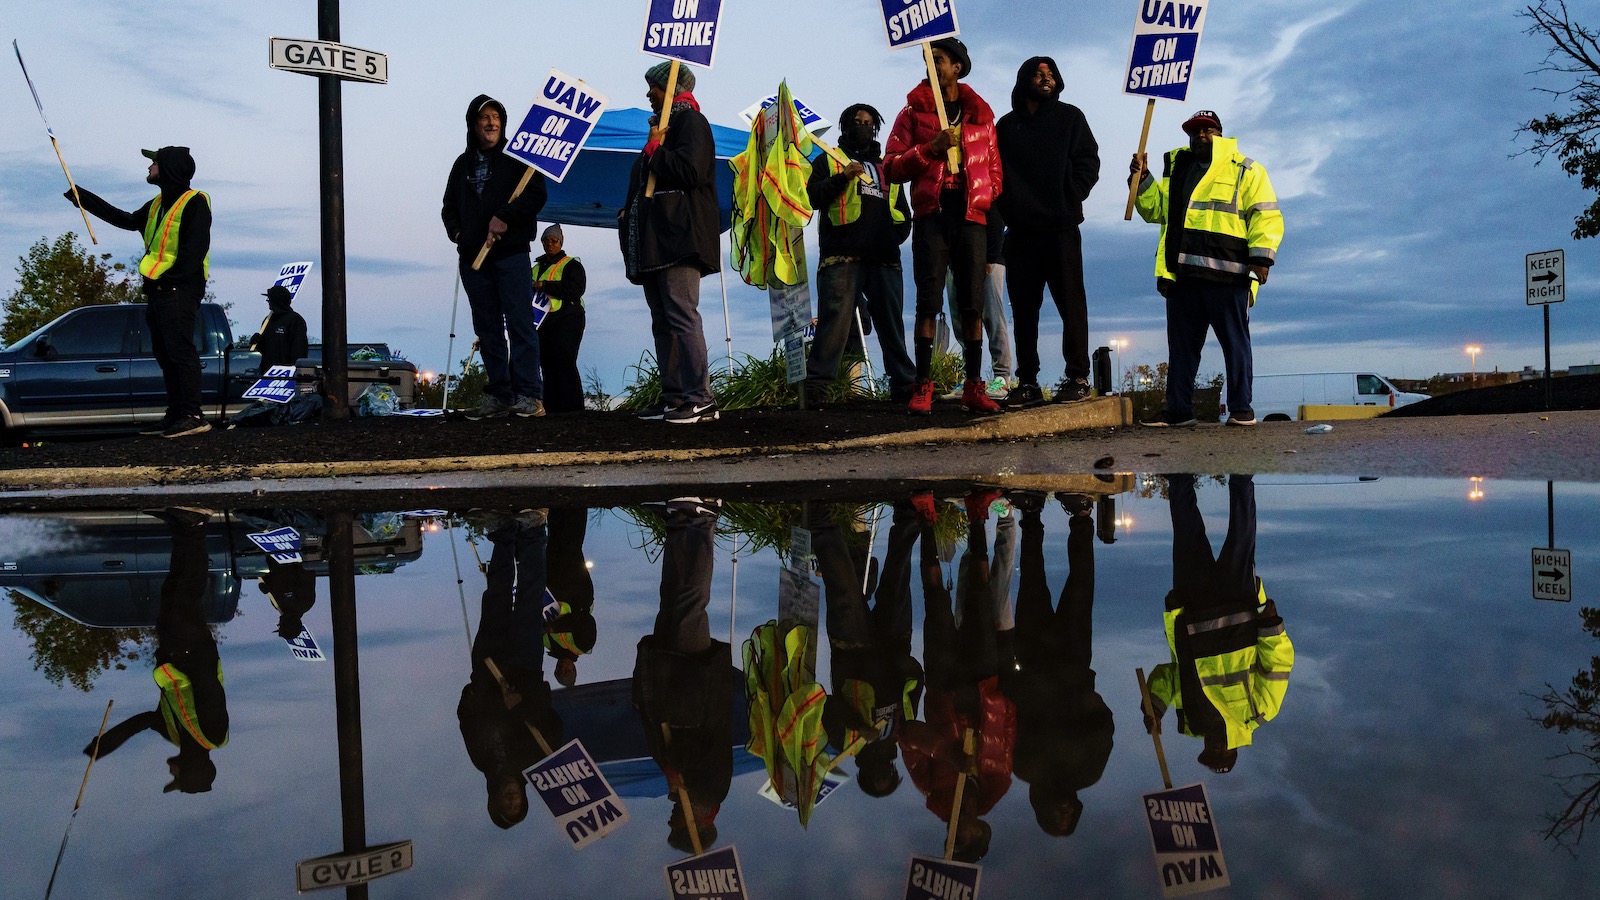 Factory workers and members of the United Auto Workers waving placards outside a factory in Louiseville, Kentucky are reflected in a puddle.